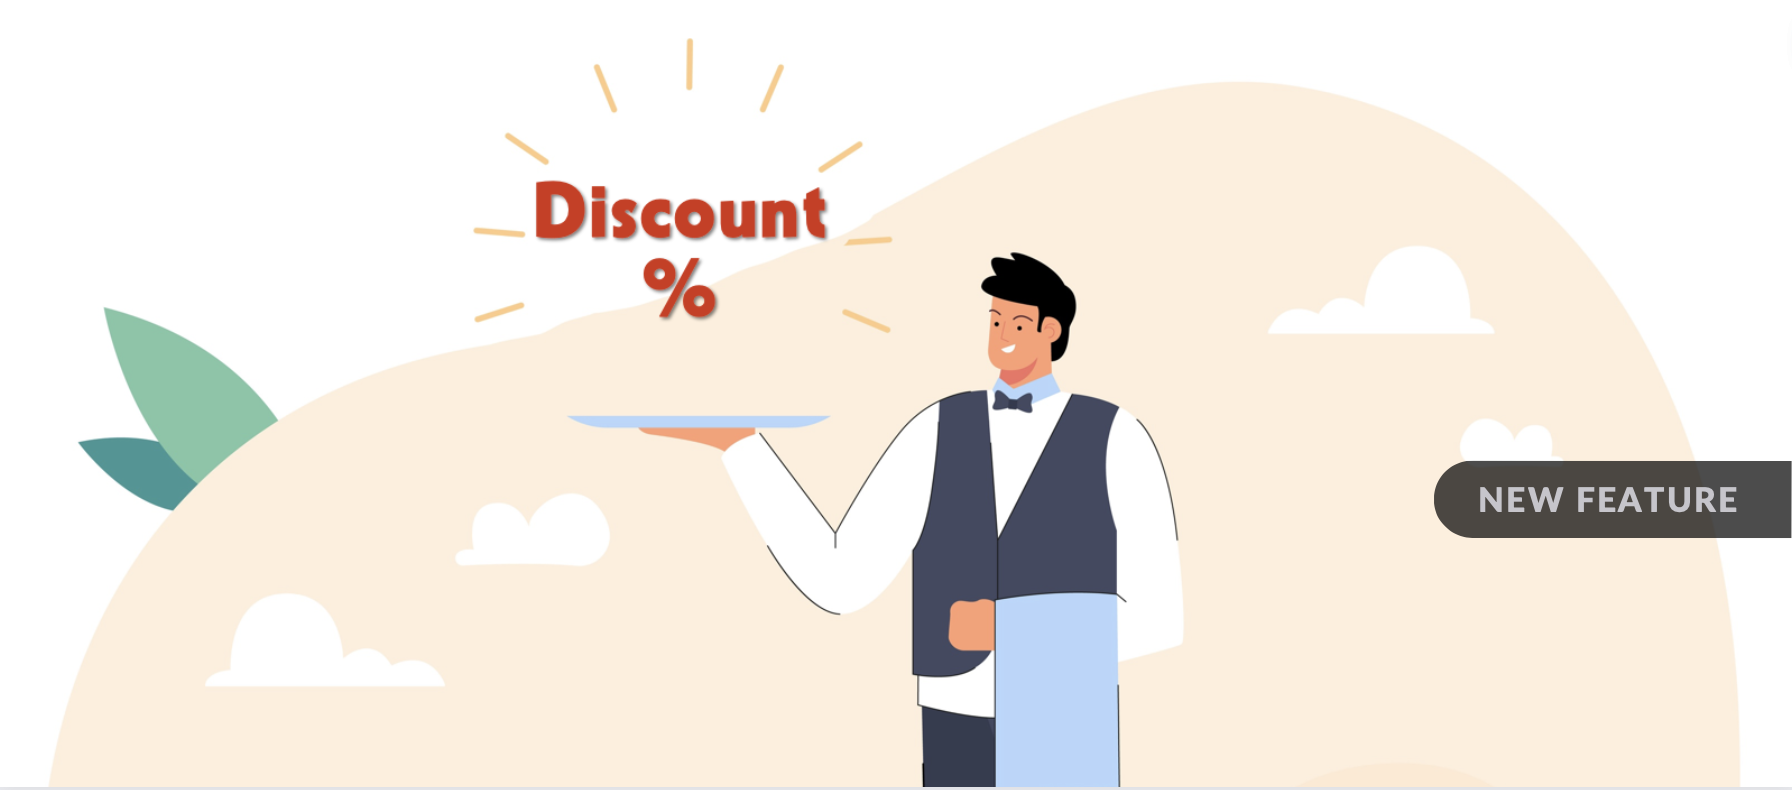 Add discount list to restaurant POS new feature